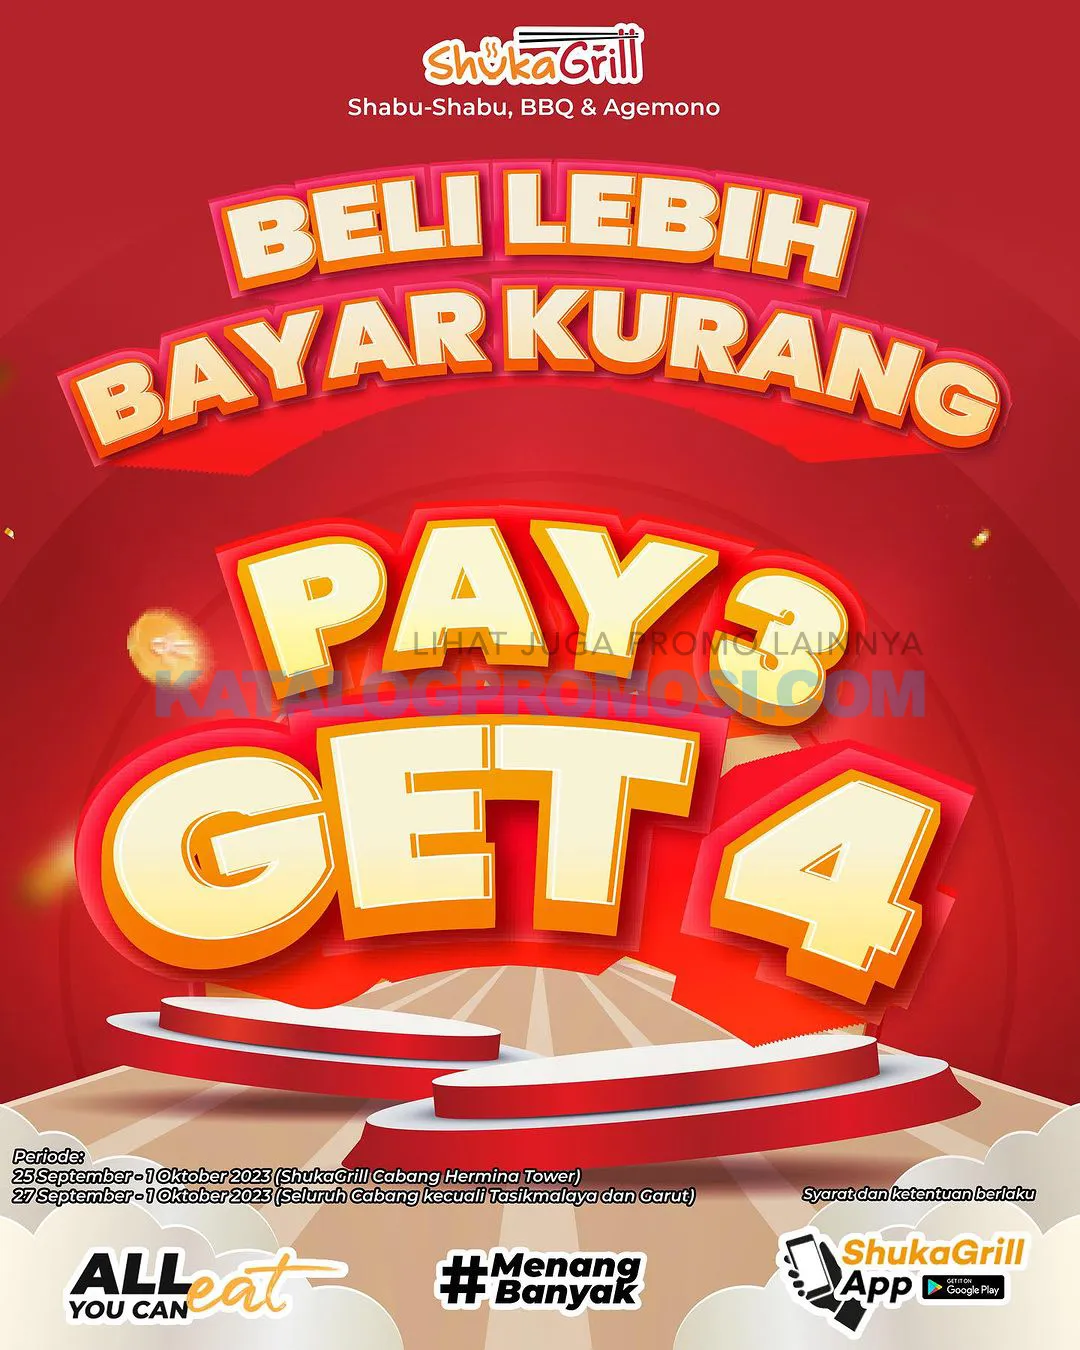 Promo SHUKAGRILL PAYDAY - PAY 3 GET 4!